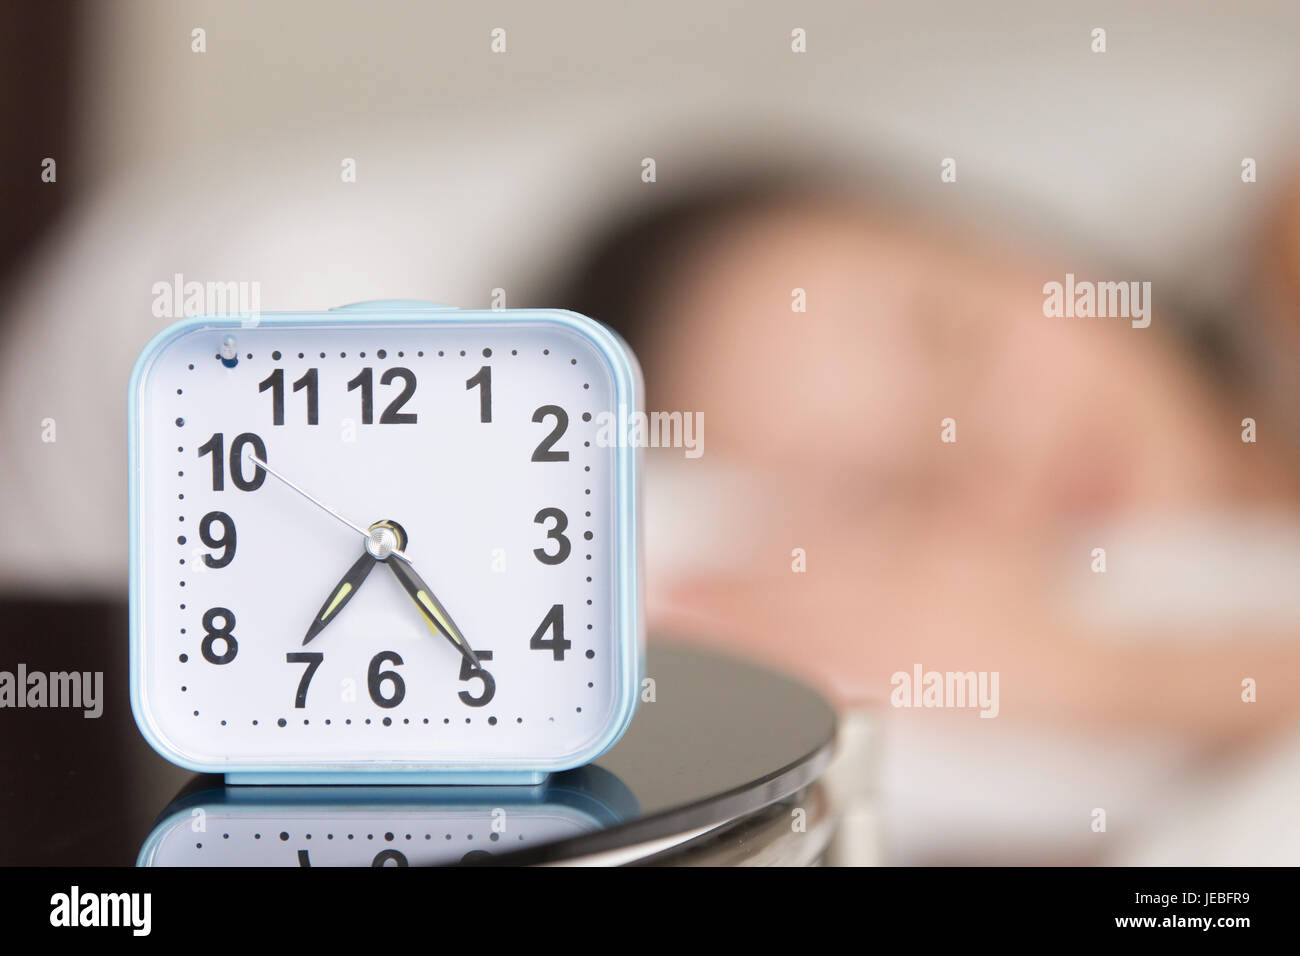 Close up image of alarm clock on bedside table Stock Photo